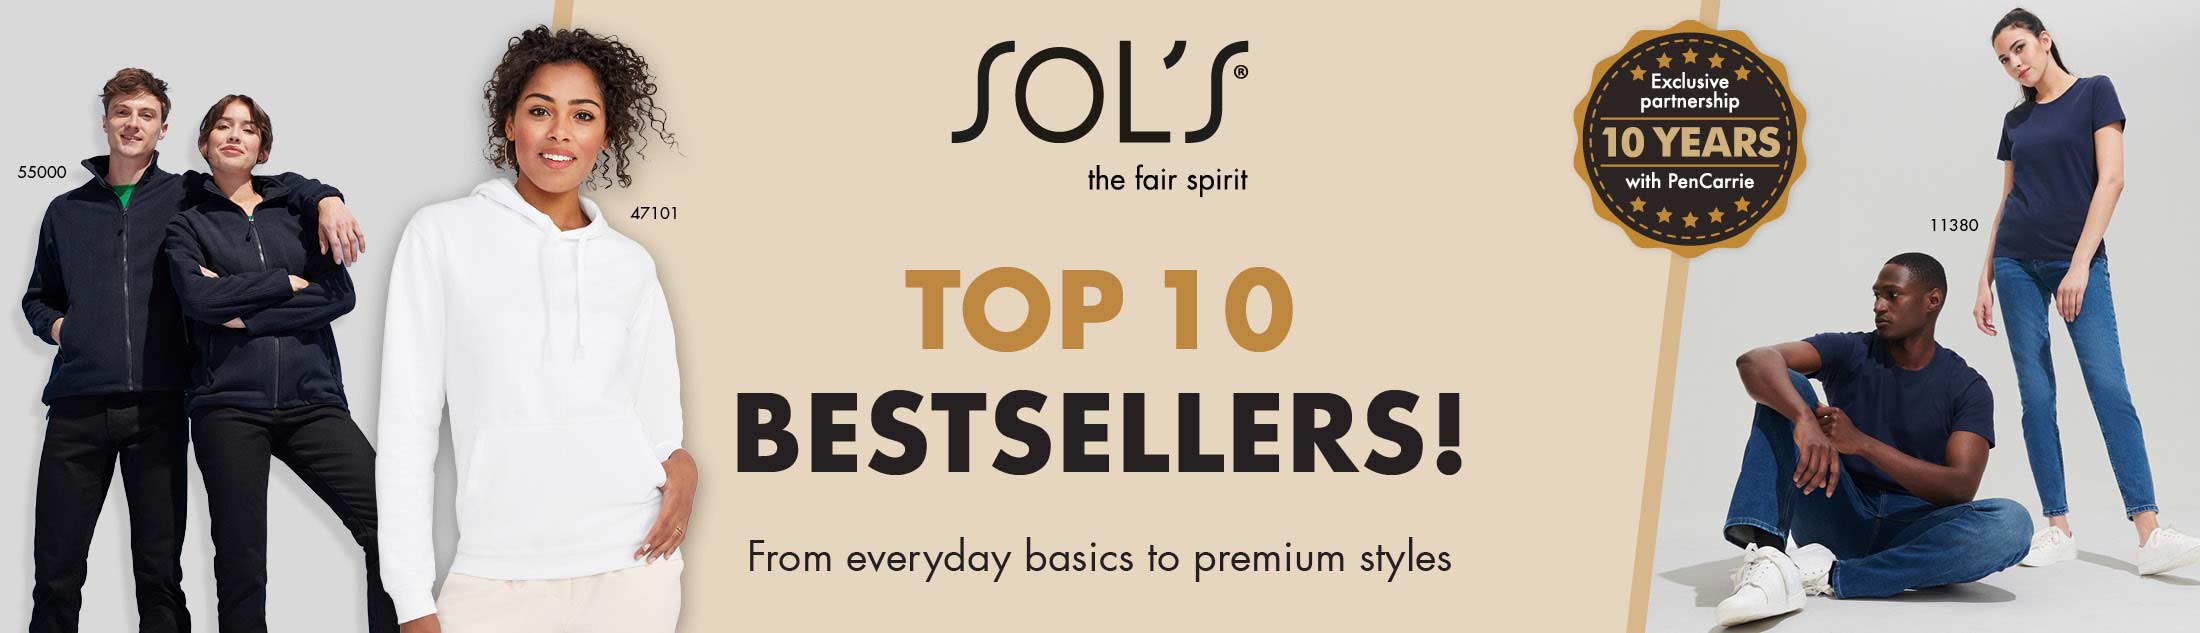 Top 10 bestsellers from SOL'S!